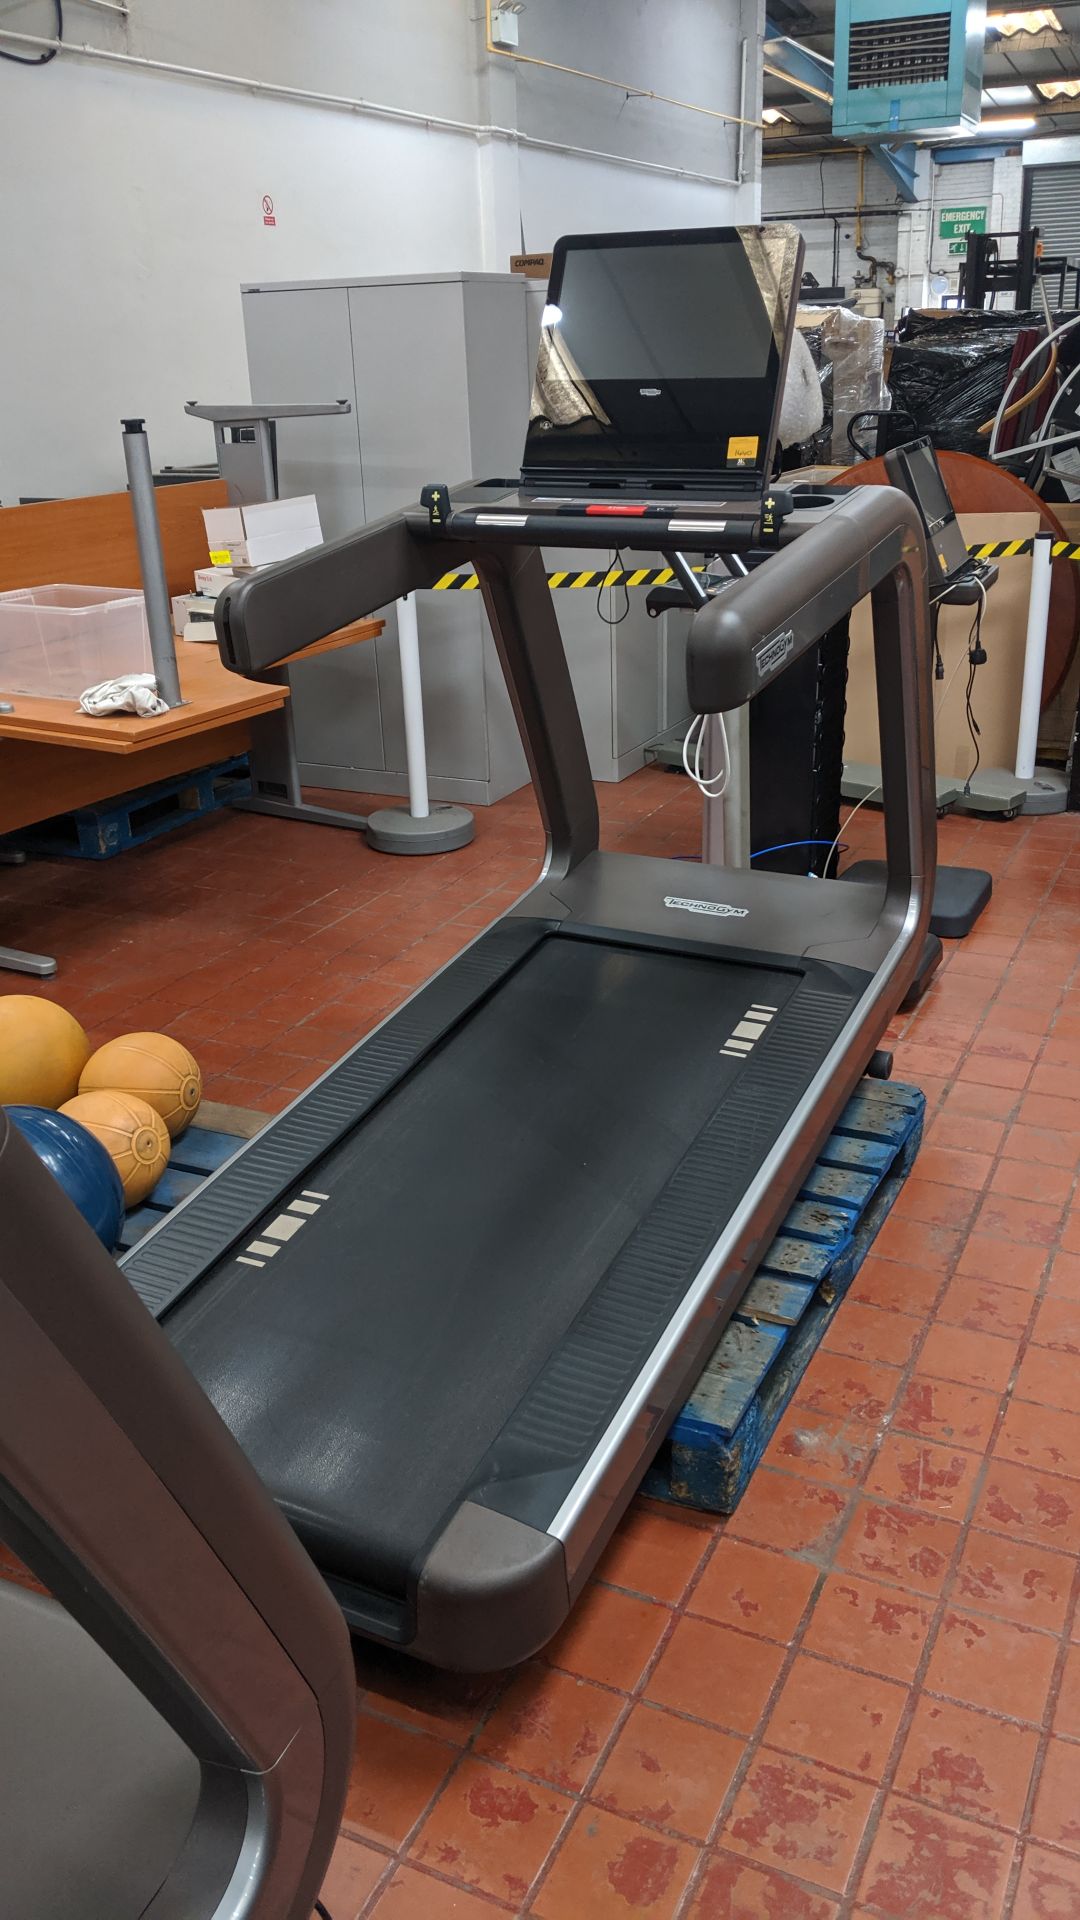 Technogym Artis treadmill Purchased new in 2016 - refurbished/recommissioned by Technogym - please - Image 2 of 16